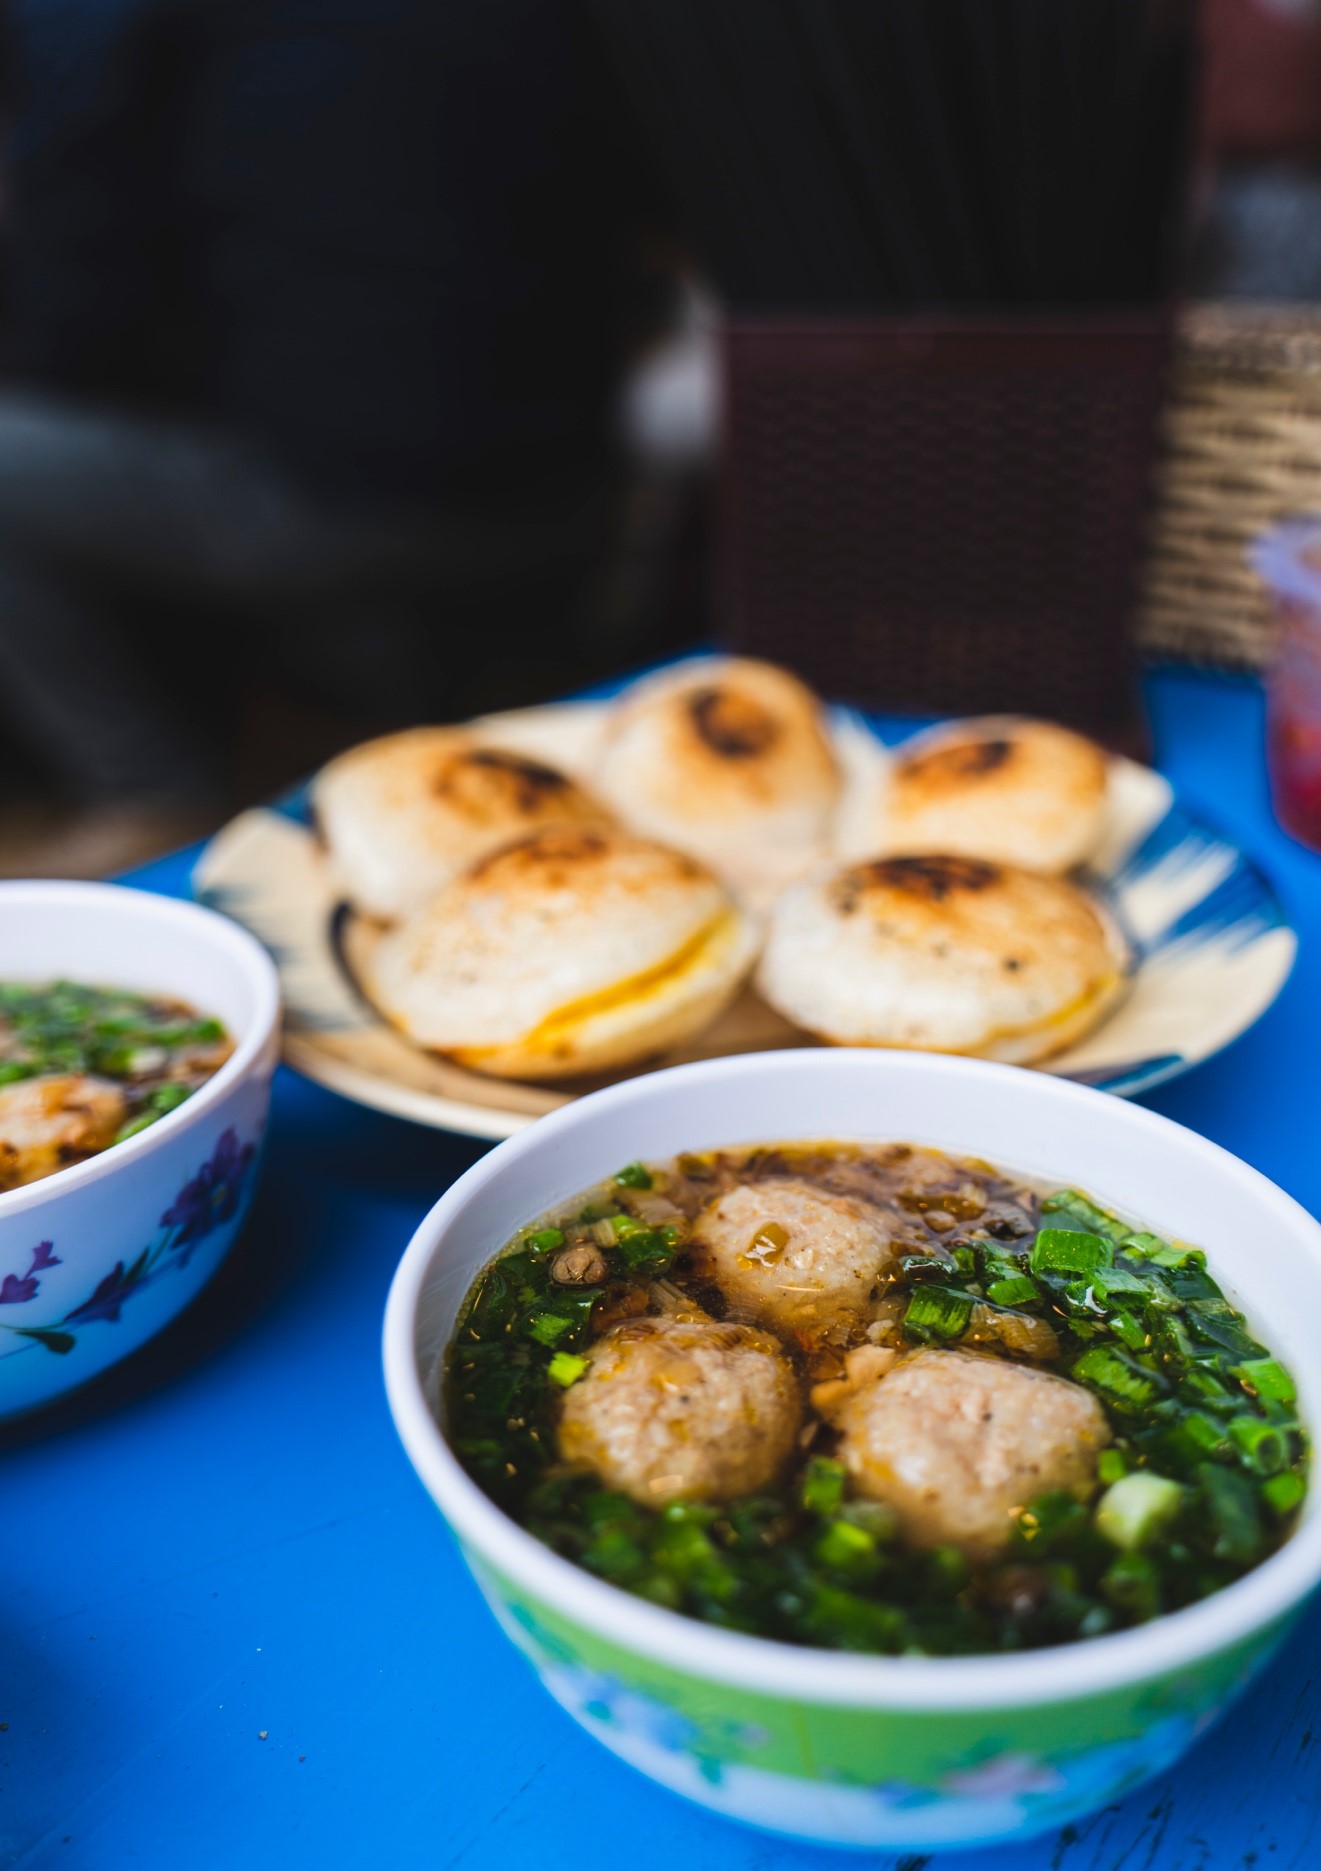 Banh can is served with meatball soup. Photo: Nguyen Trung Au / Tuoi Tre News